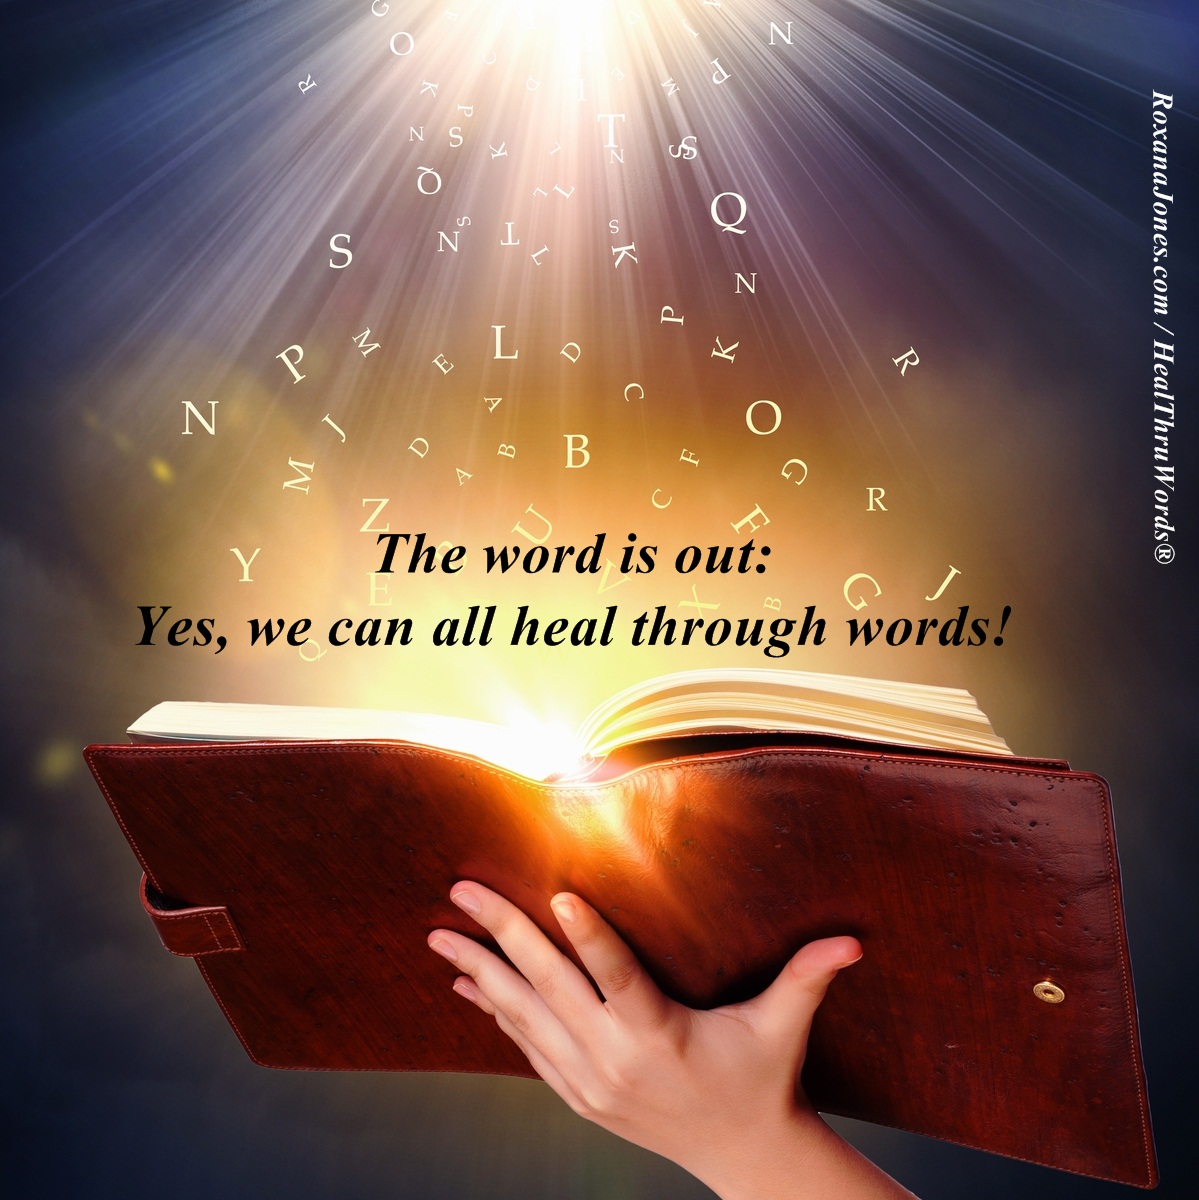 The world is out yes, we can all heal through words